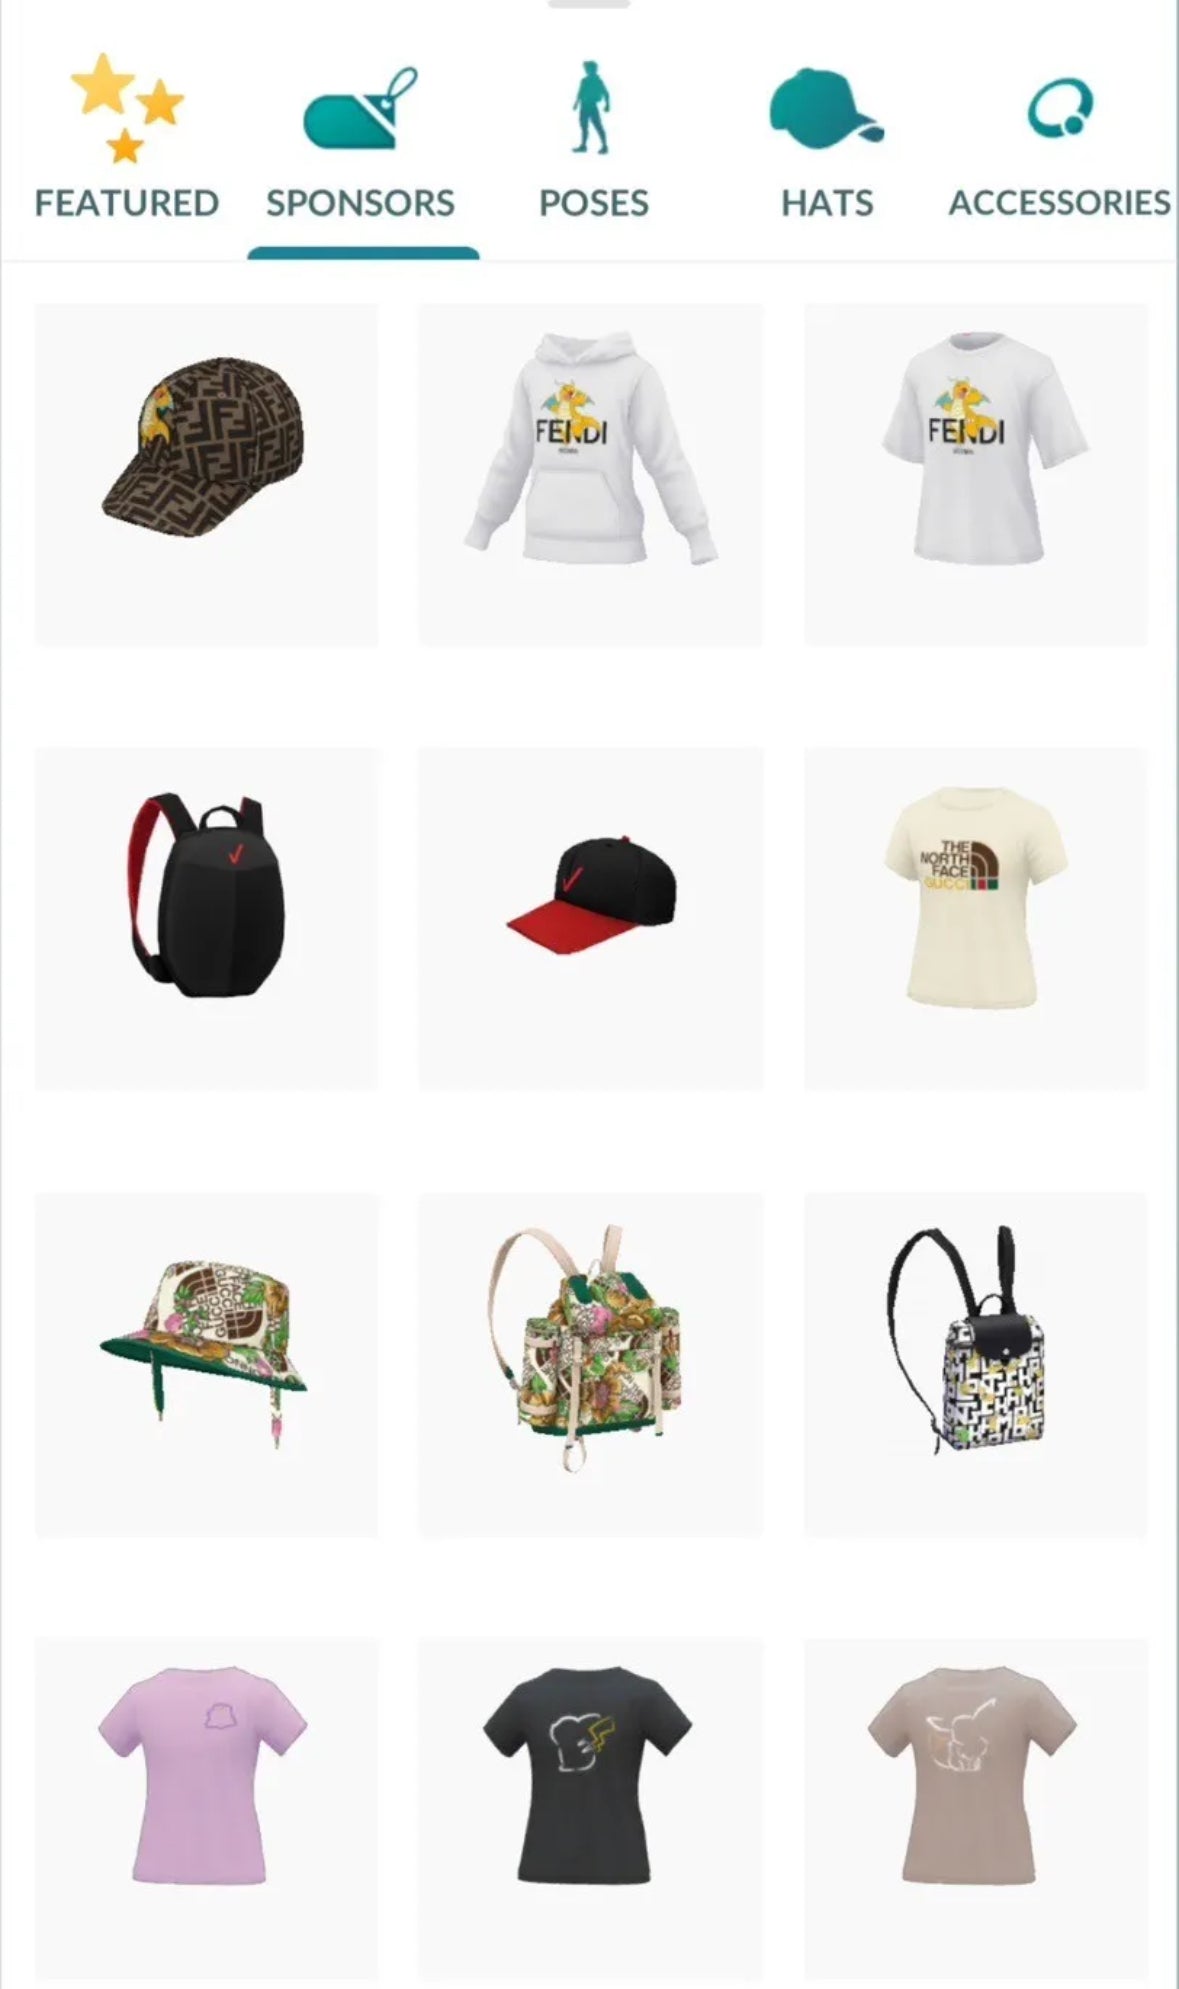 Fendi outfit added to your account